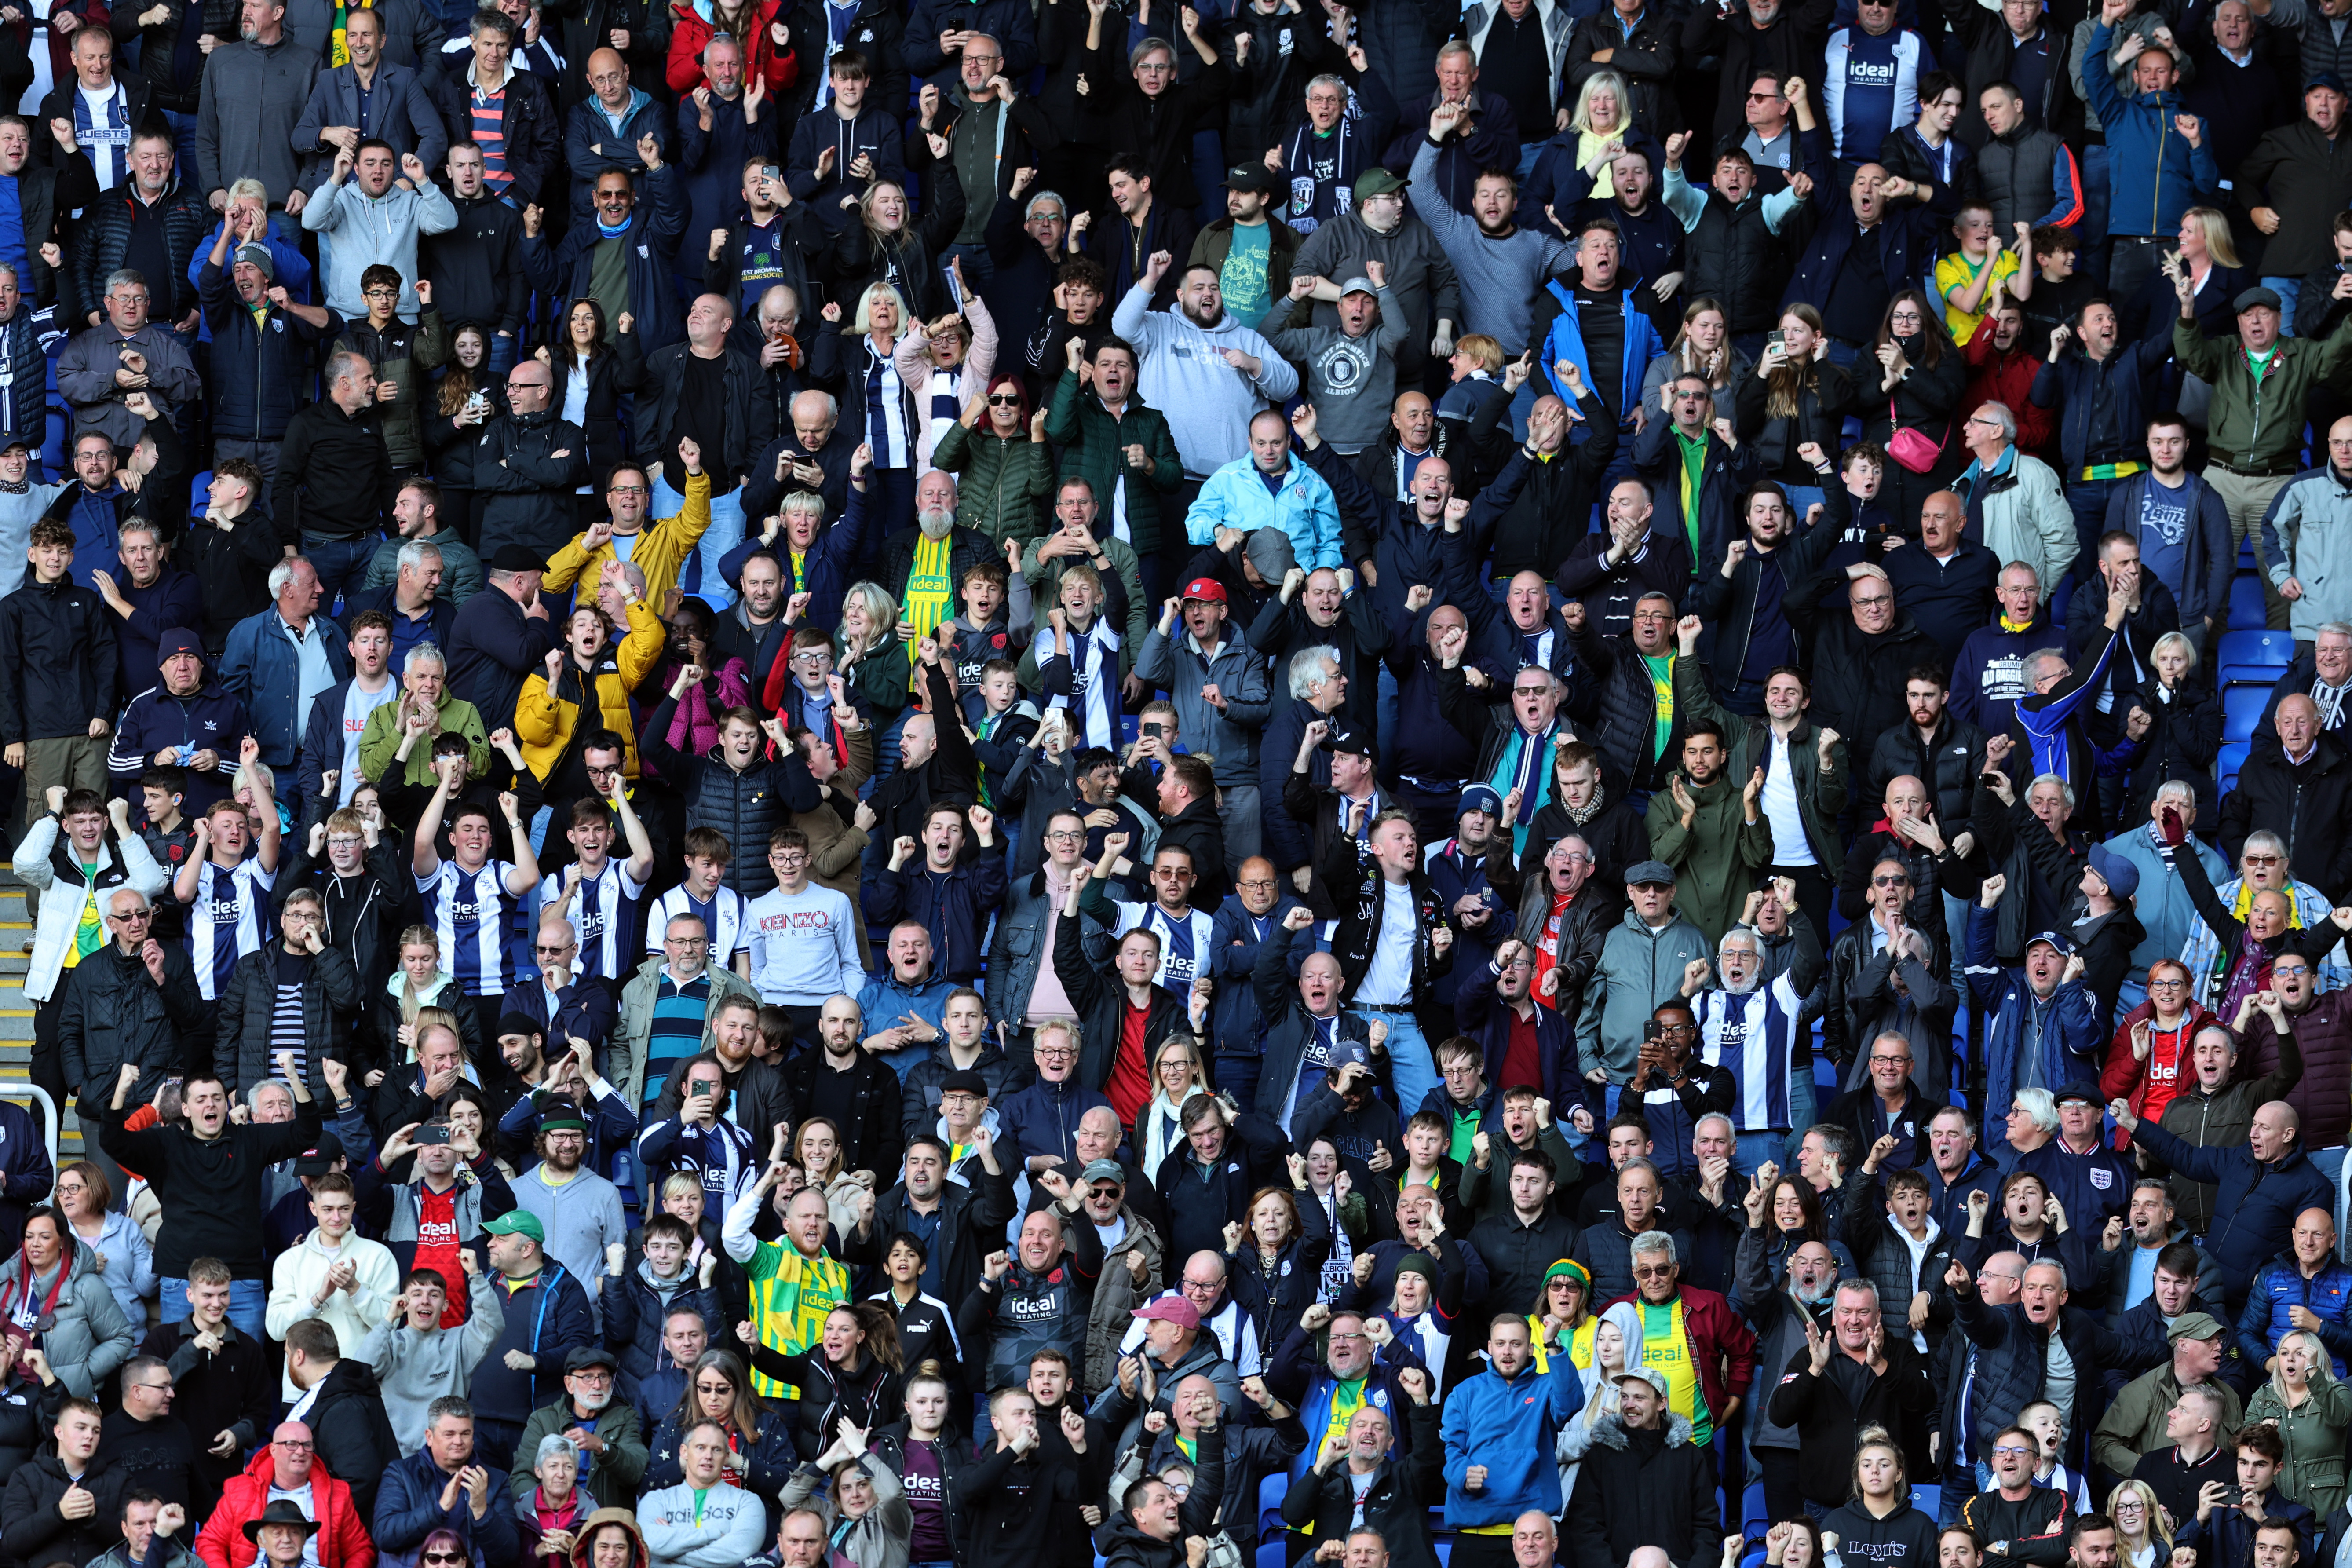 Albion fans supporting the team.